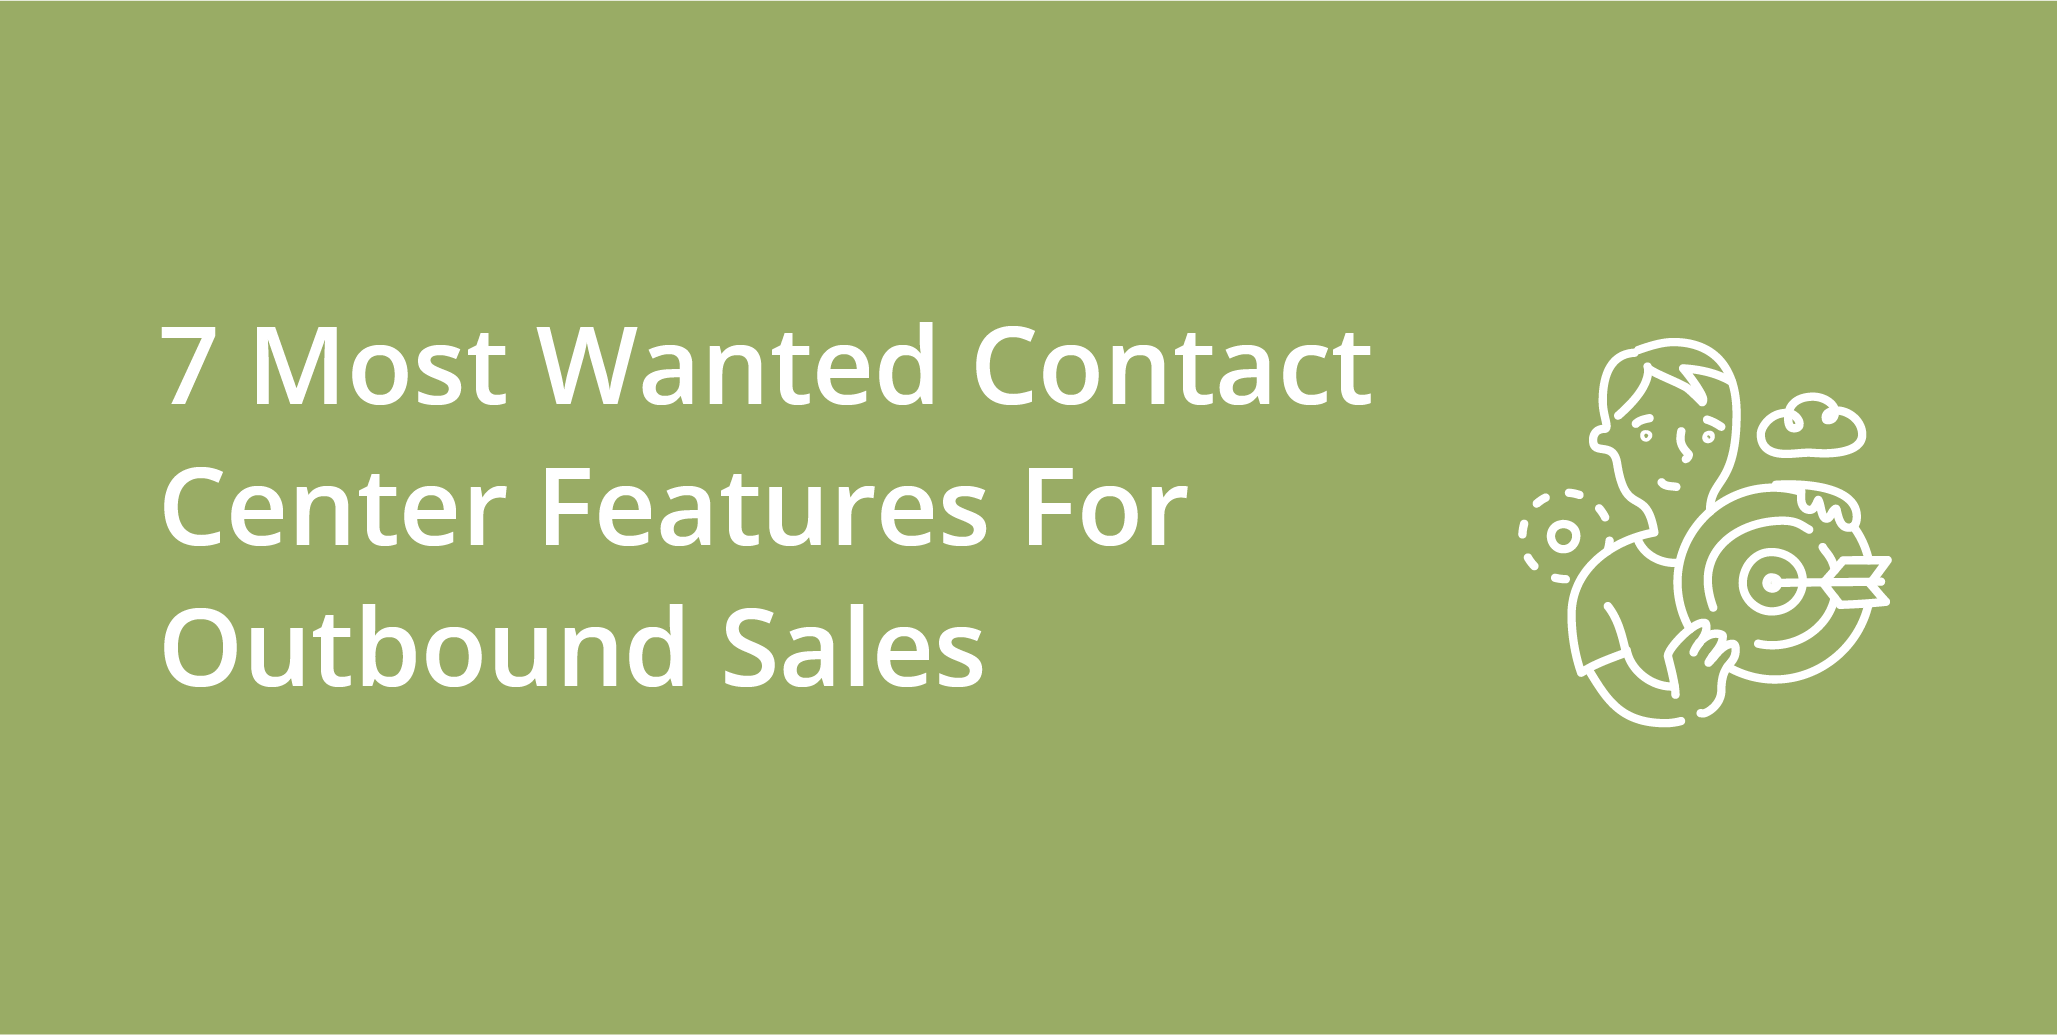 7 Most Wanted Contact Center Features For Outbound Sales | Telephones for business